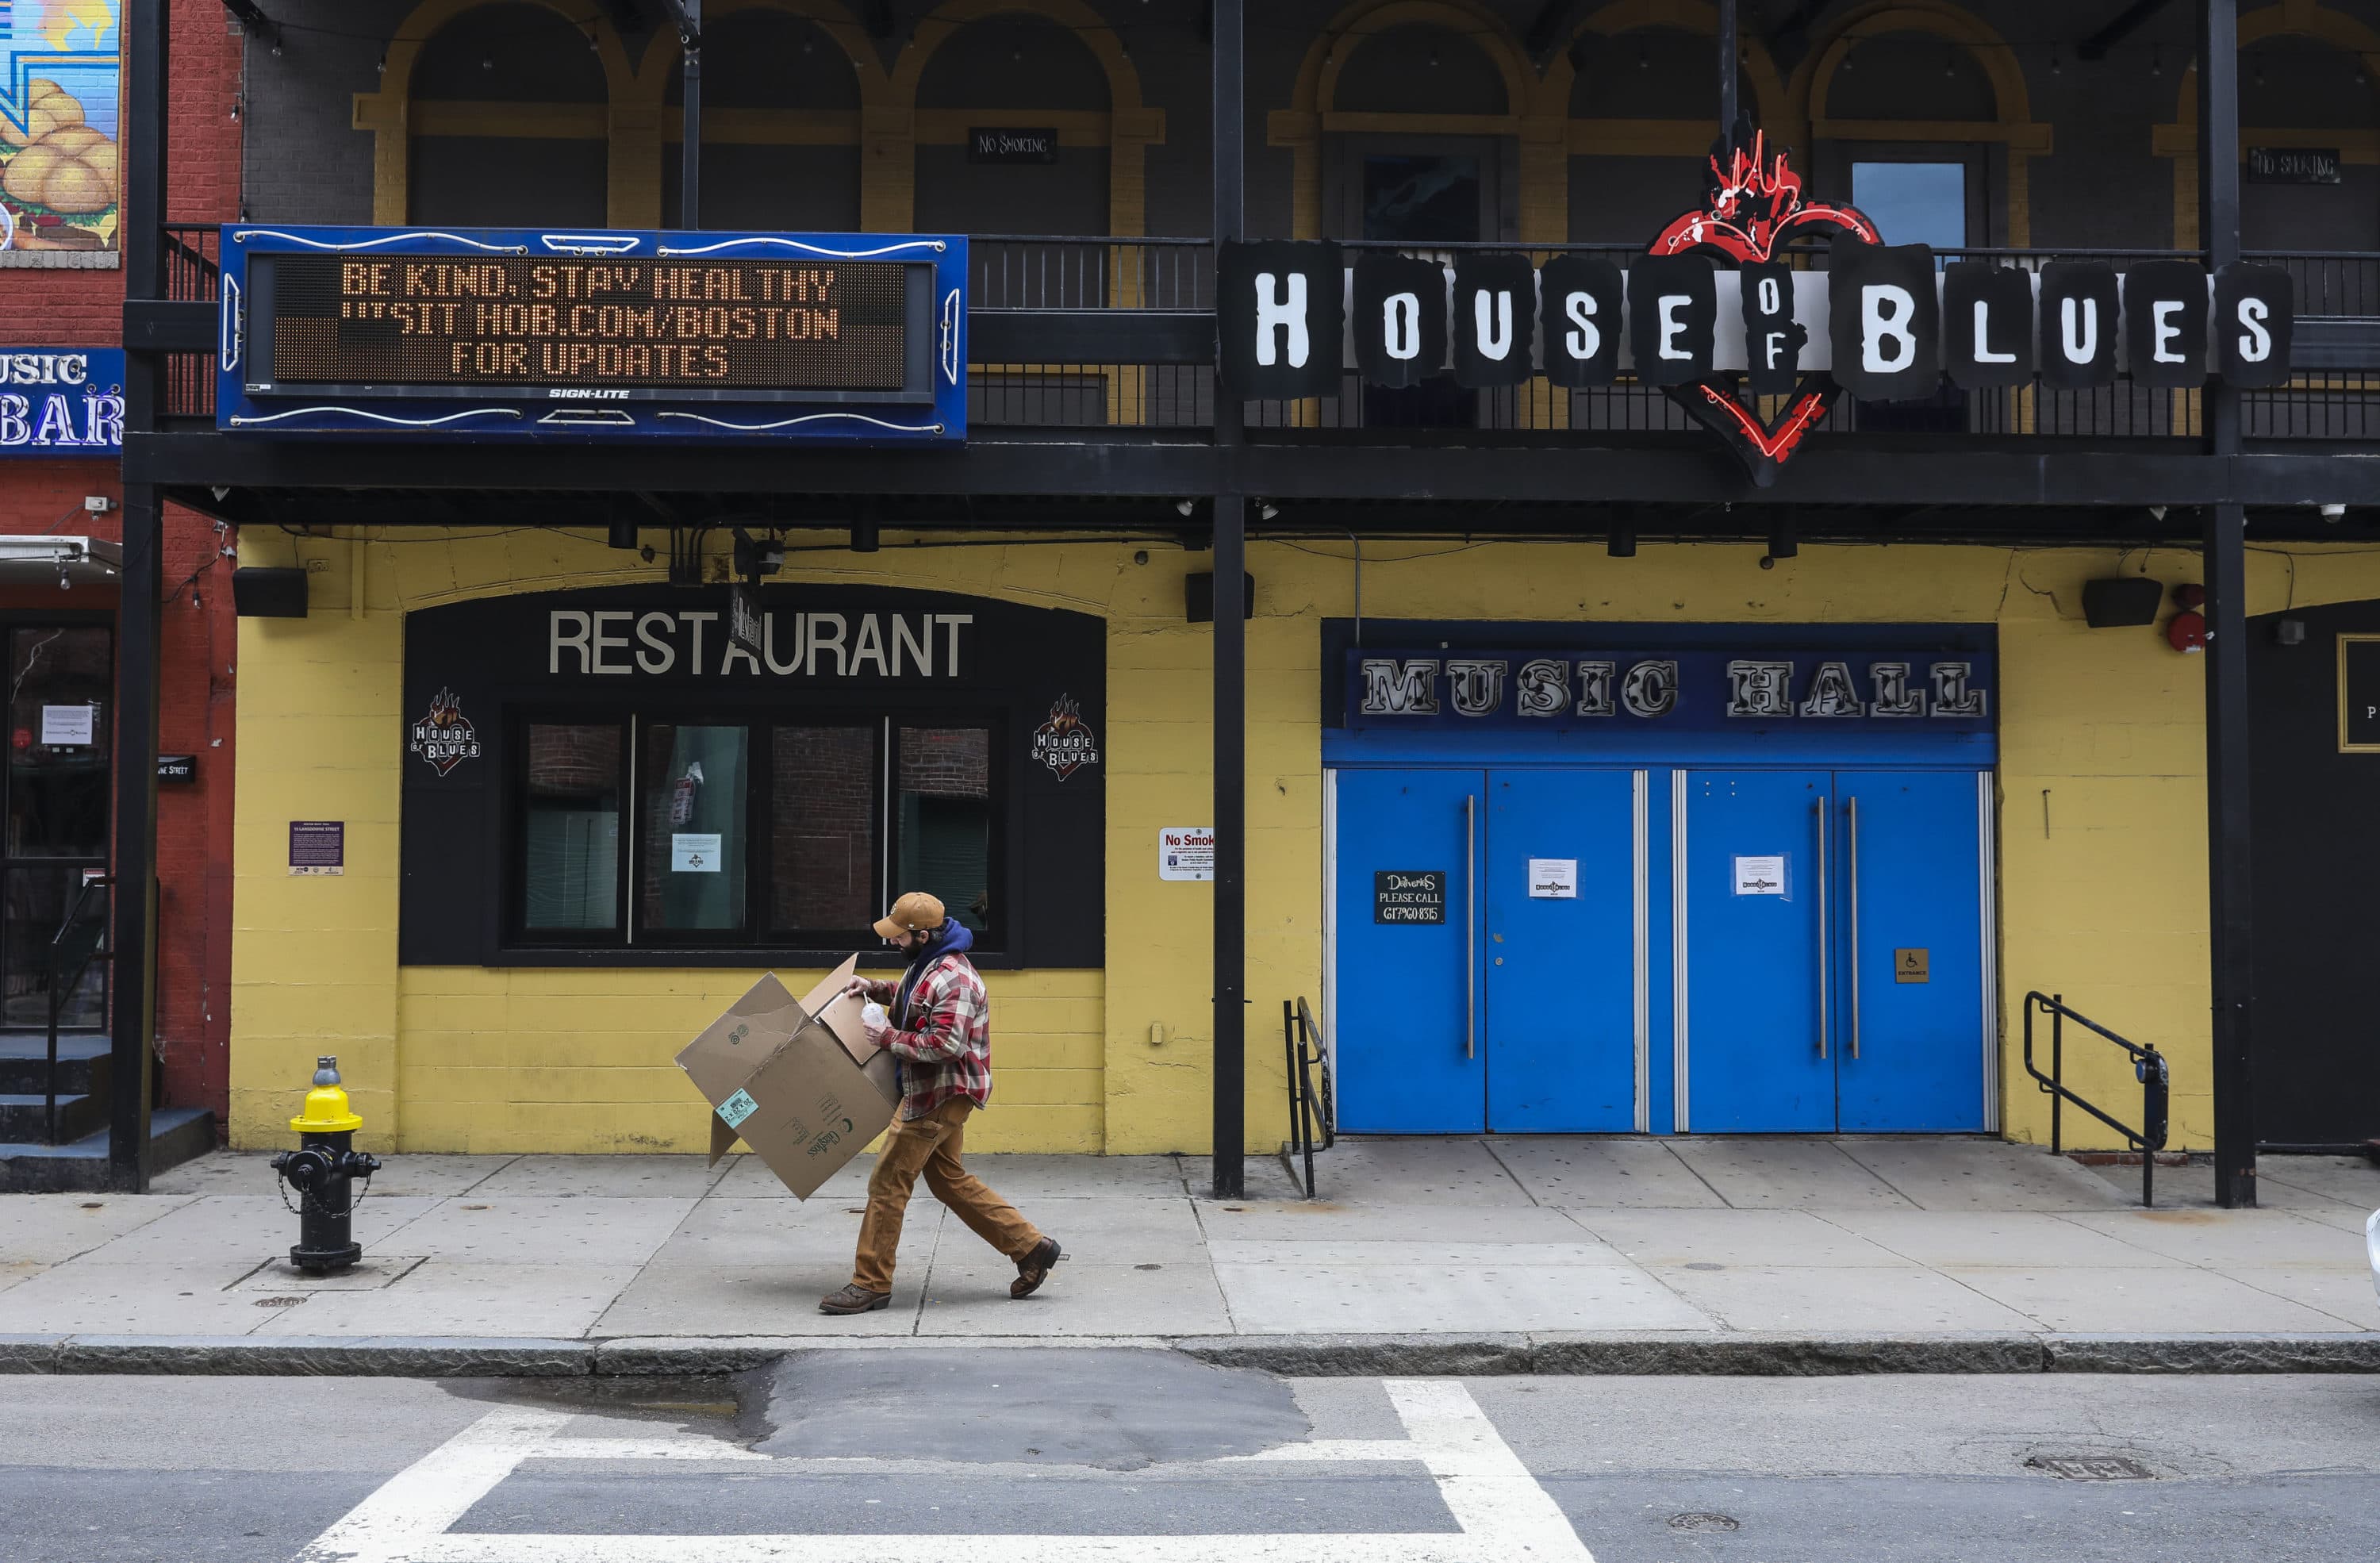 A man breaks down a cardboard box while walking past the House of Blues' COVID-19 sign urging people to be kind and stay healthy in April 2020. (Erin Clark/The Boston Globe via Getty Images)